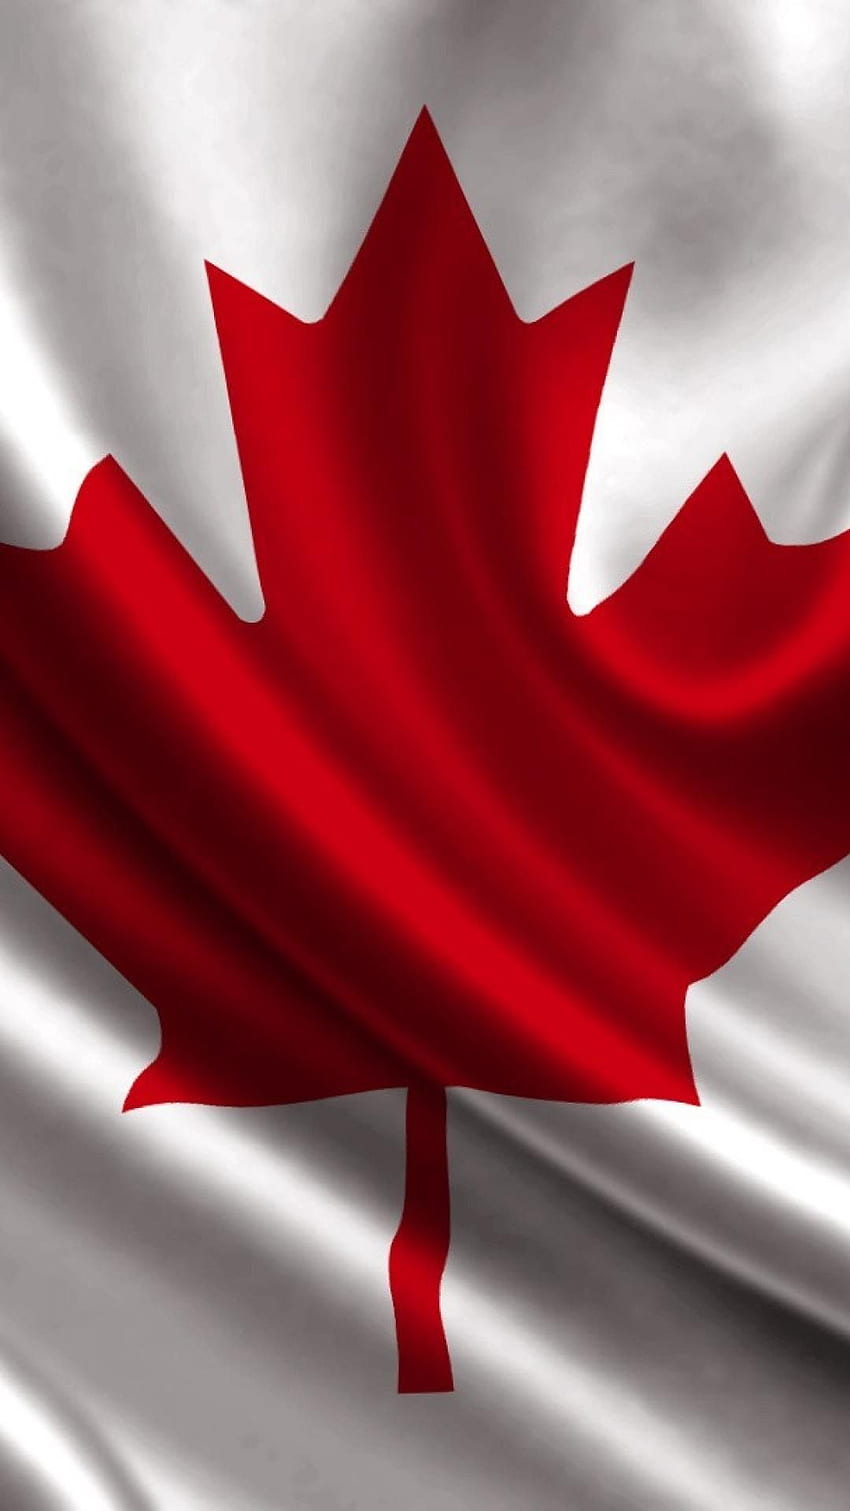 750 Canada Flag Pictures  Download Free Images on Unsplash